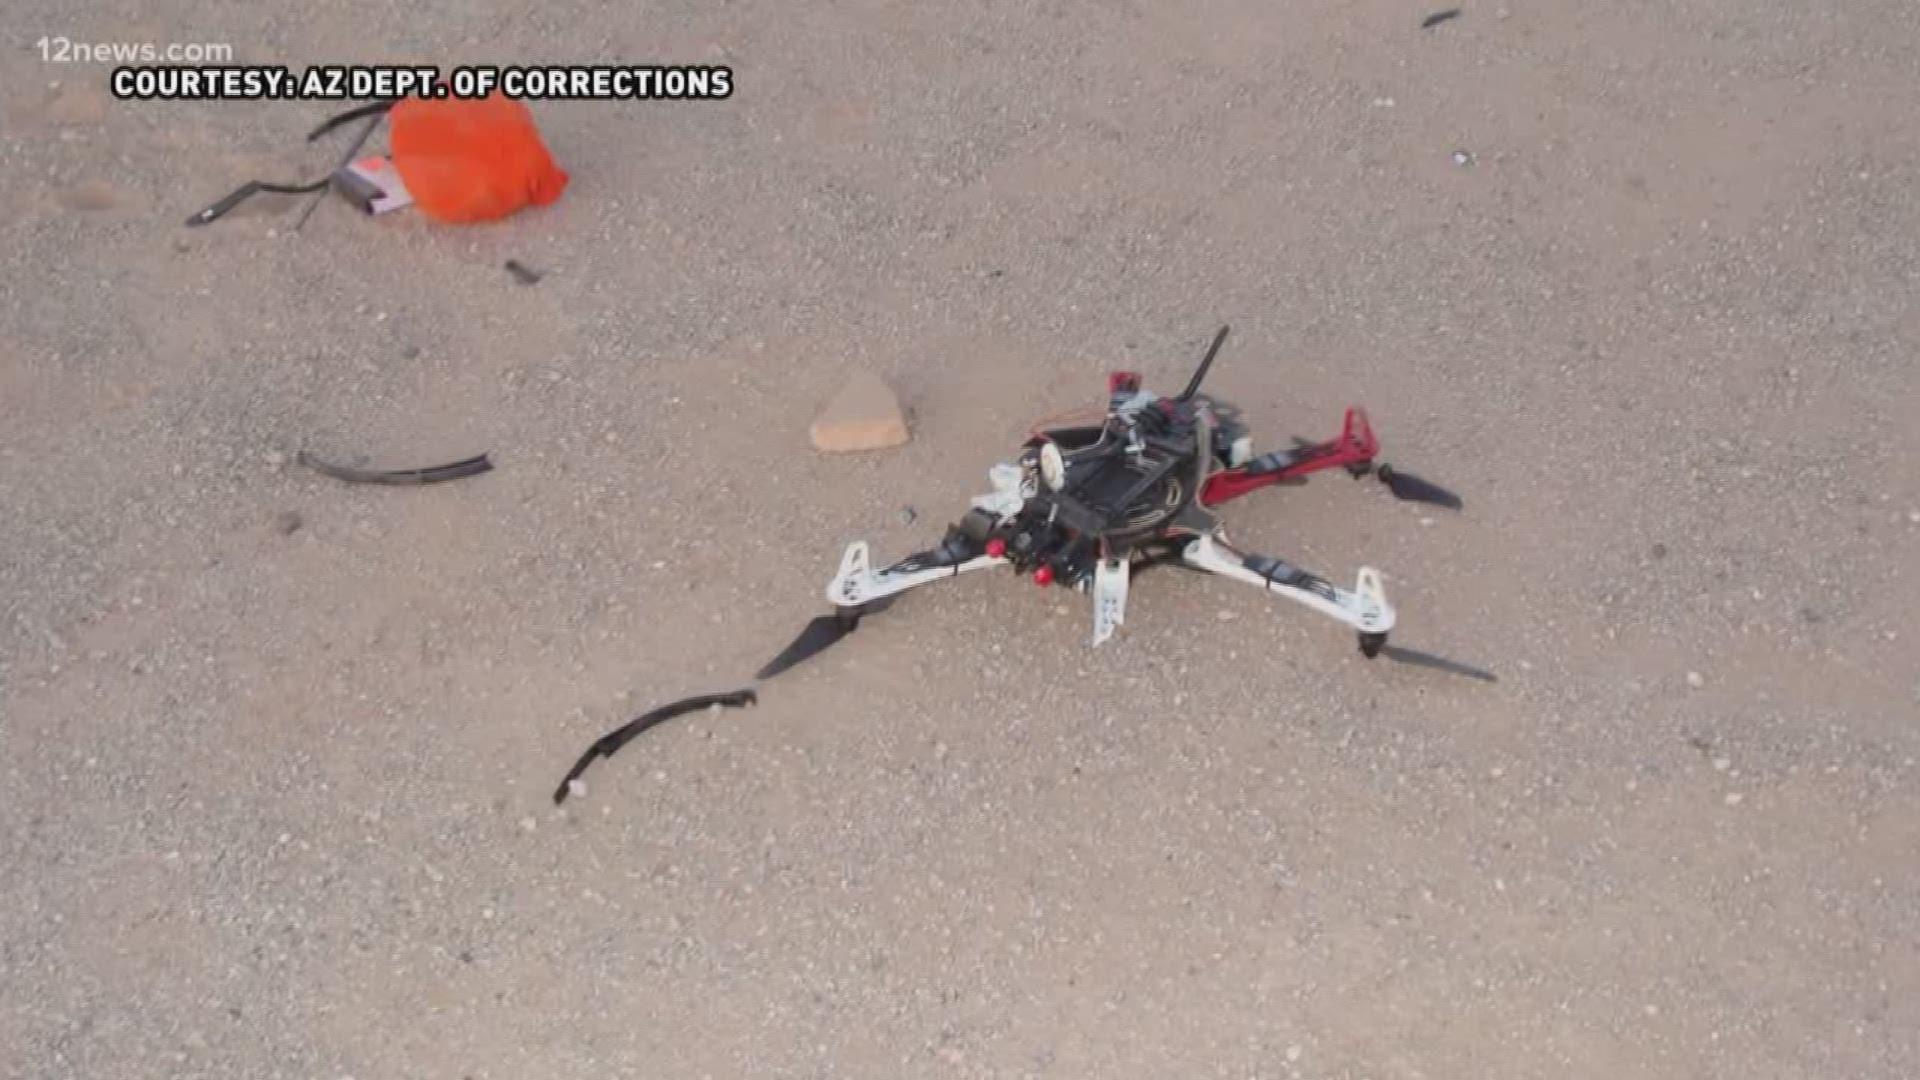 A drone carrying contraband to prisoners crashed at the ASPC-Lewis prison in Buckeye.